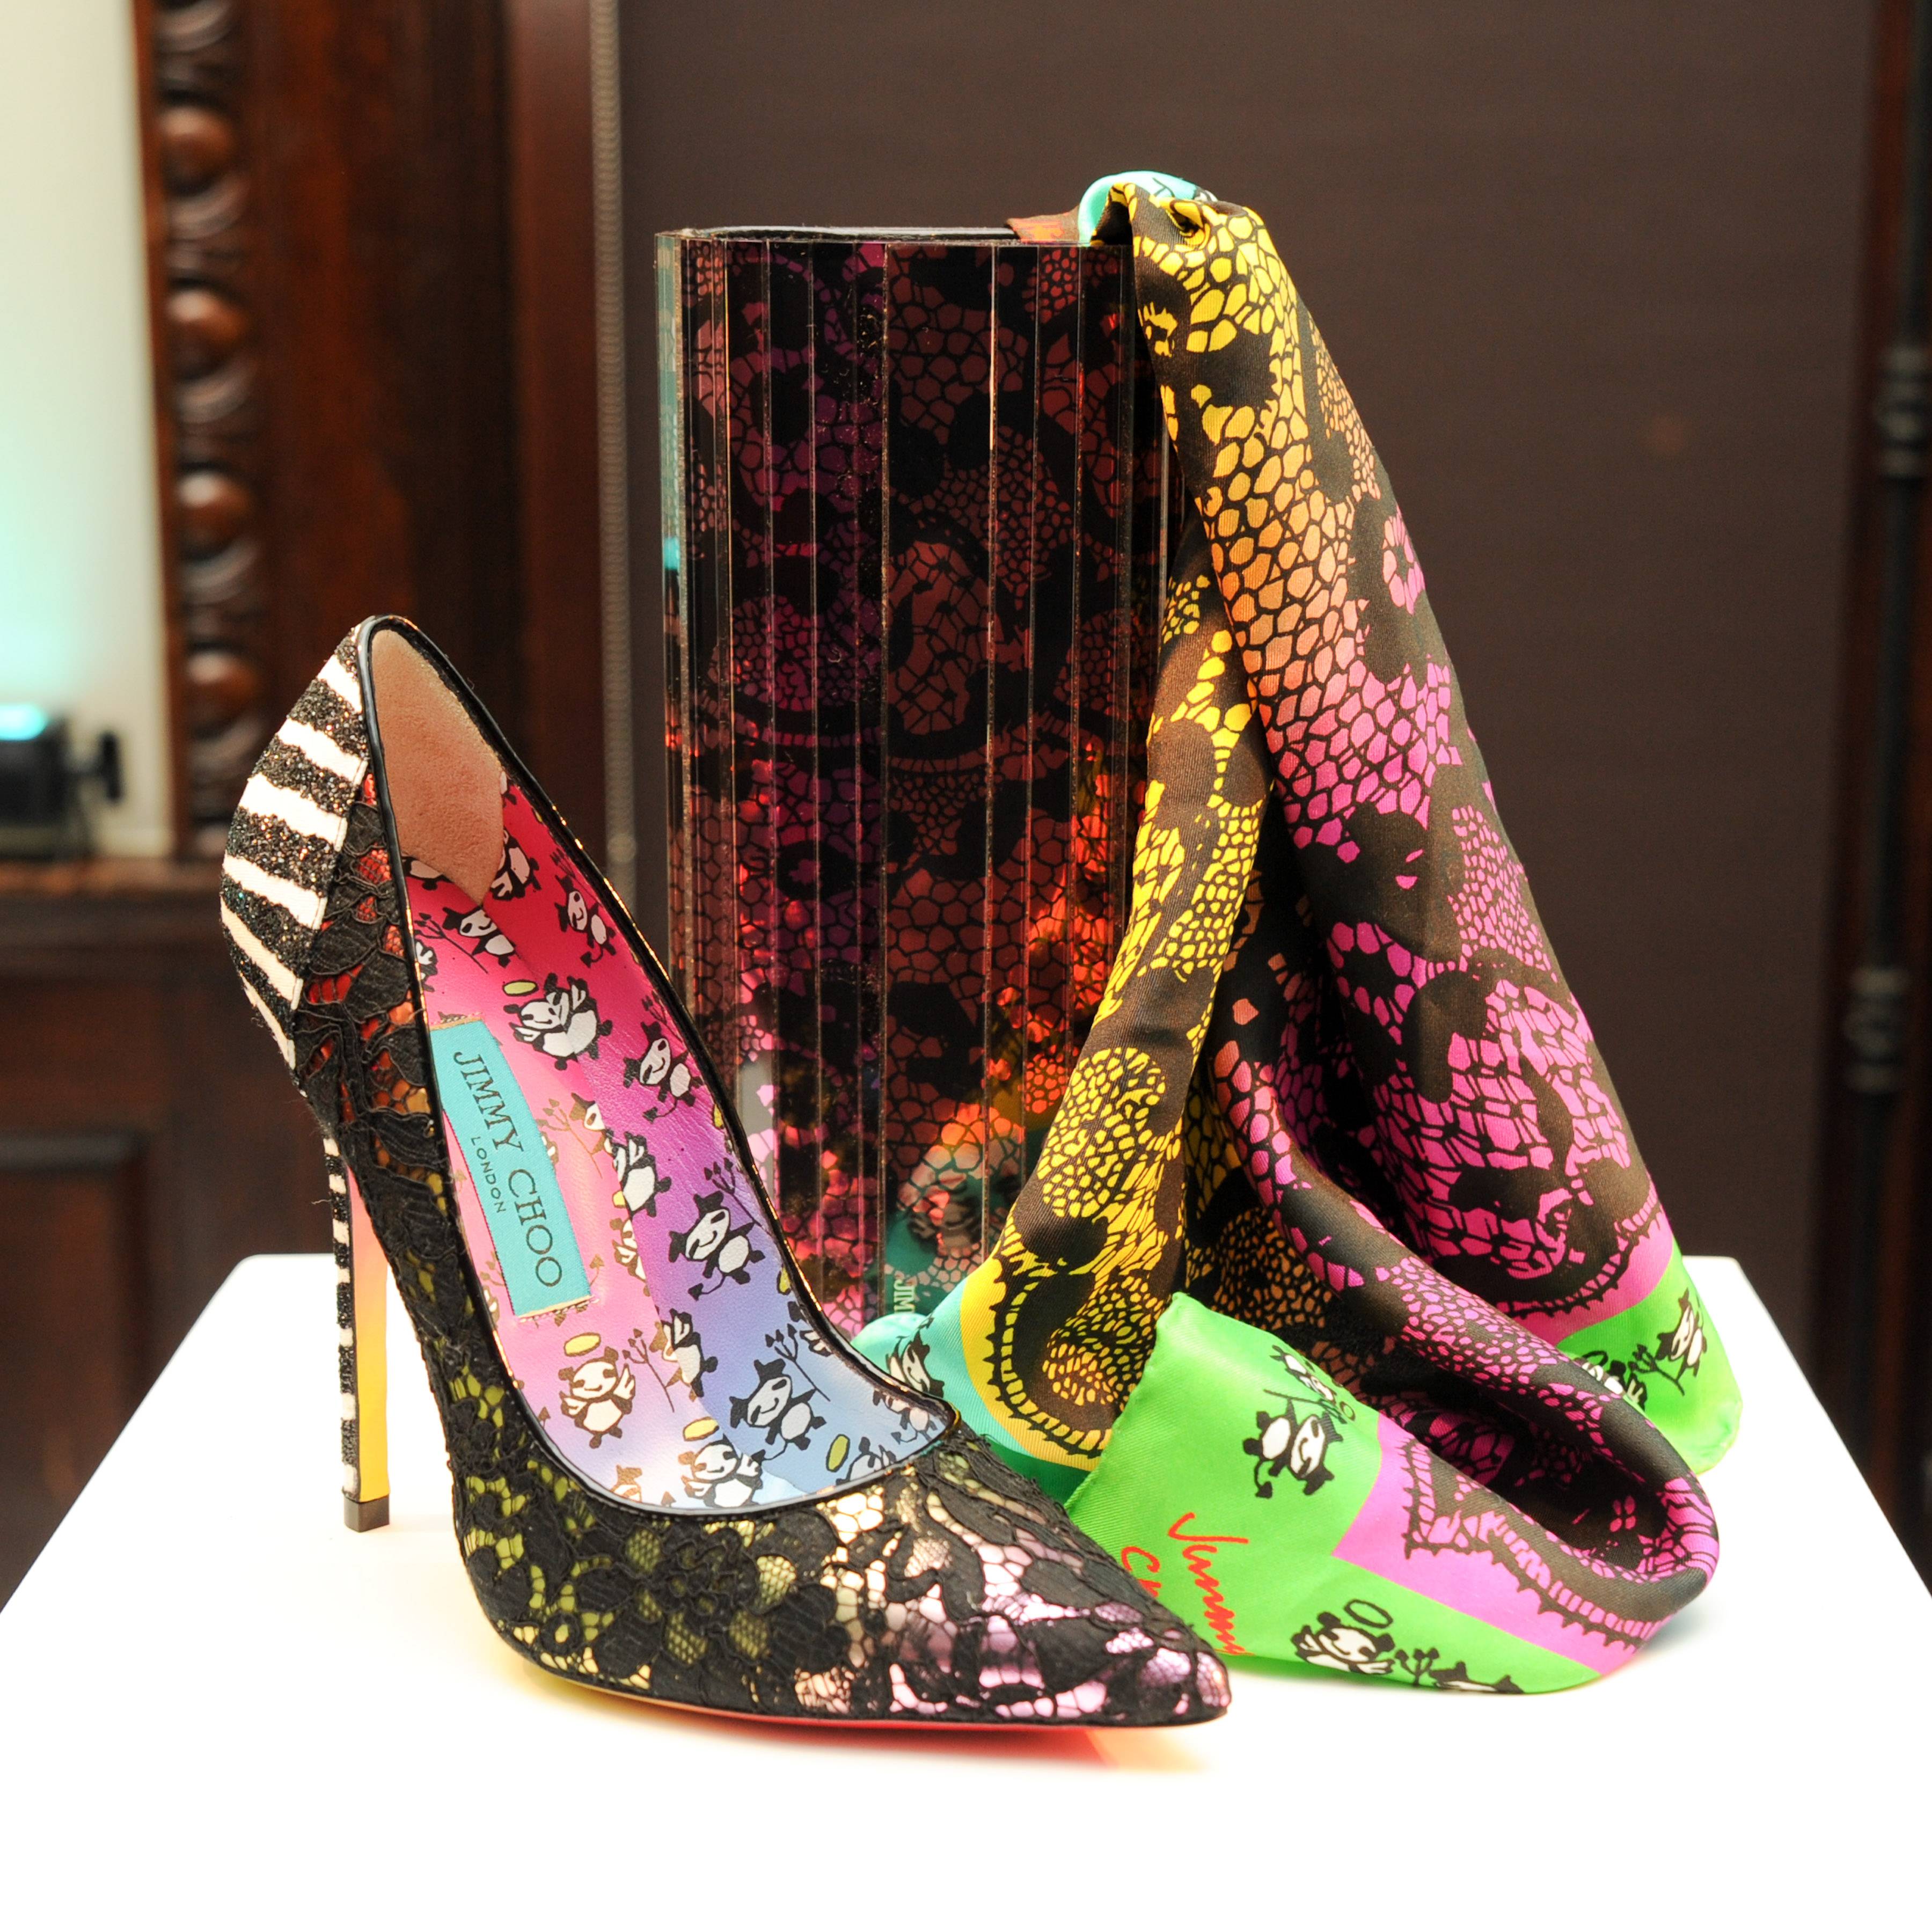 JIMMY CHOO Celebrates the Collaboration with Artist Rob Pruitt in New York City